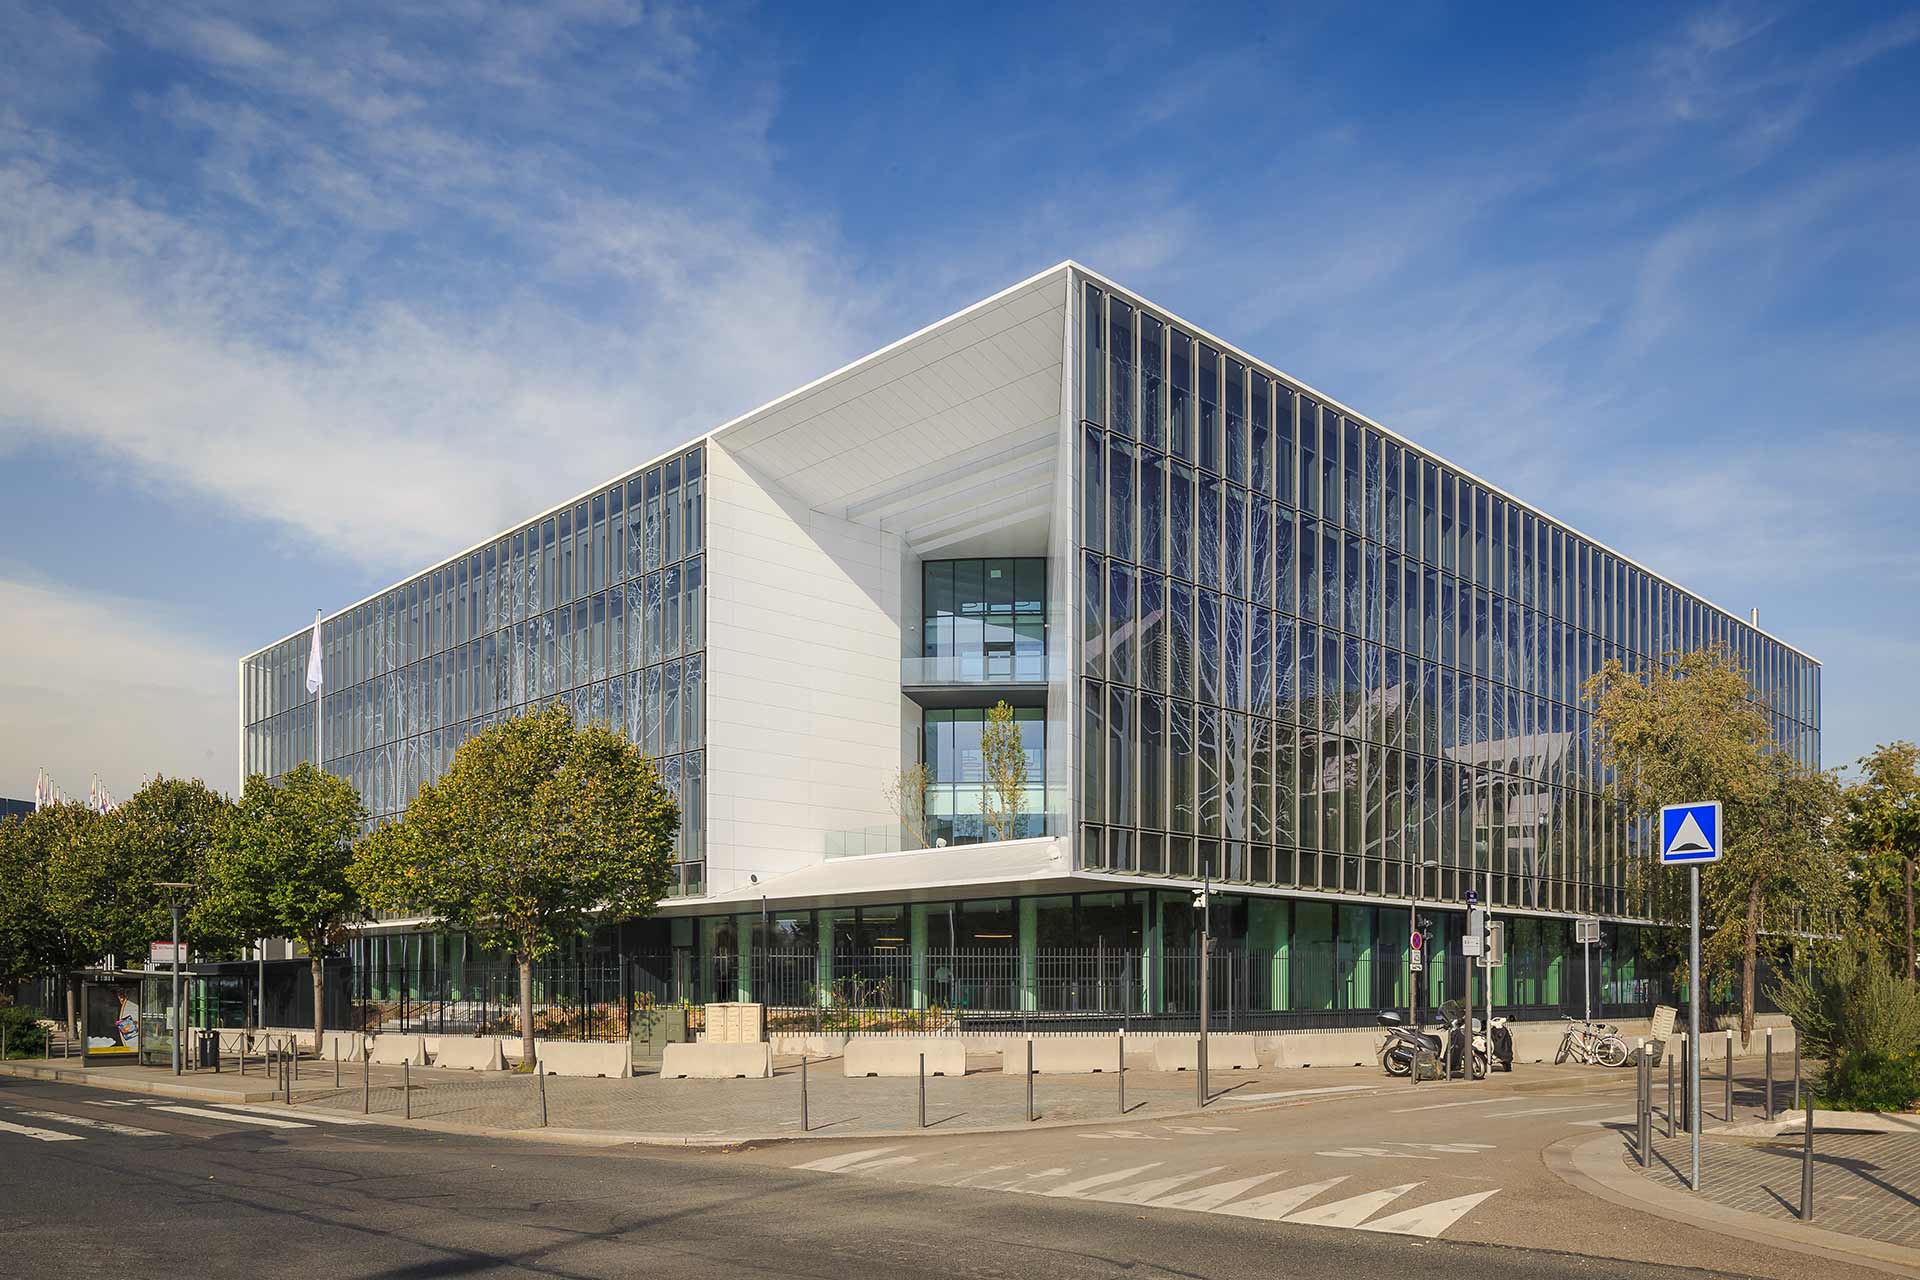 Exterior view of the Nouveau Centre, building of the headquarters of the International Agency for Research on Cancer (IARC) installed in the heart of the Lyon-Gerland Biodistrict (Lyon metropolitan area, France)